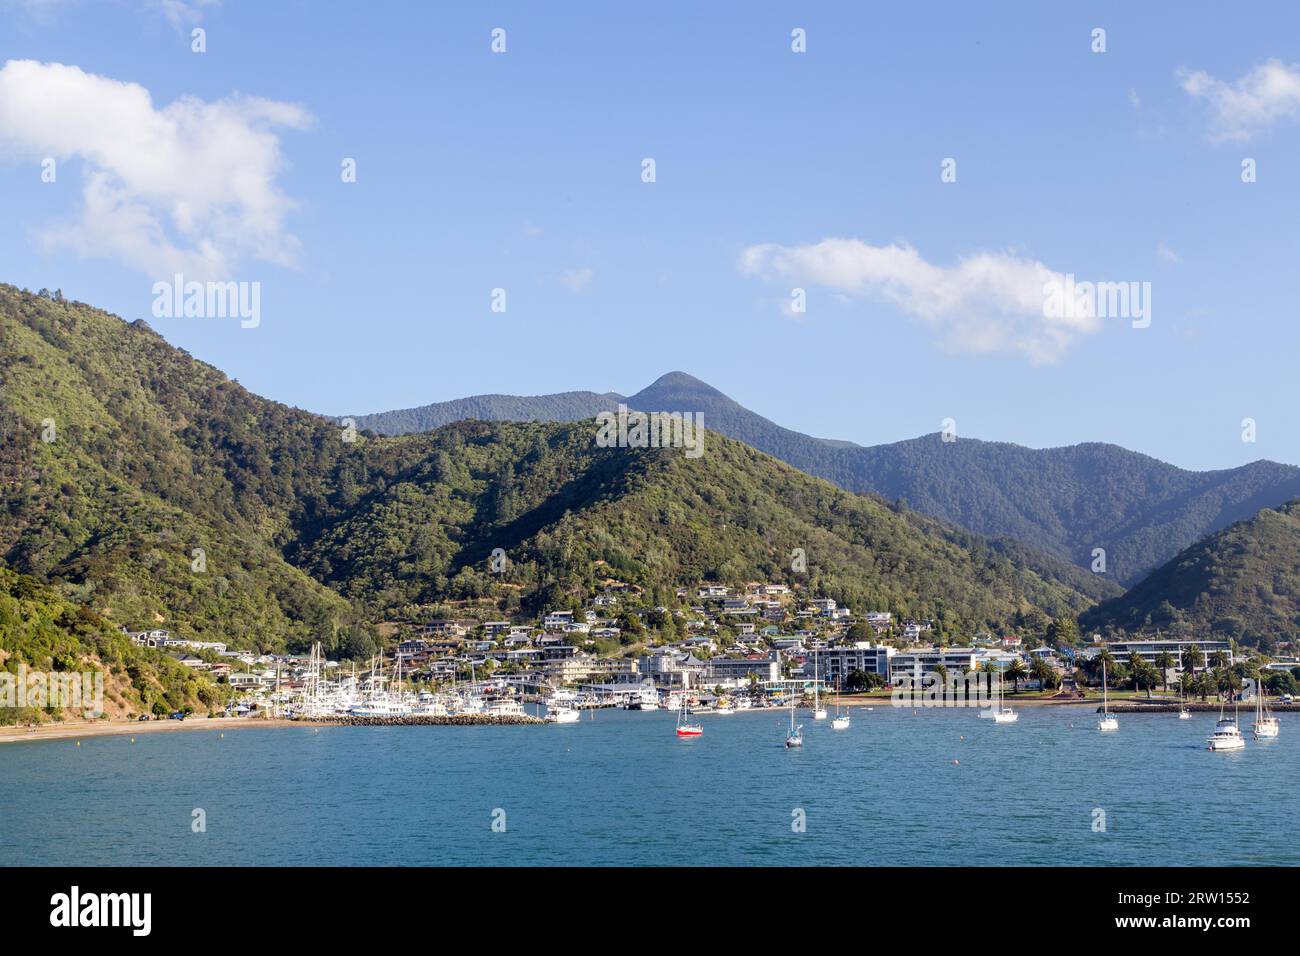 Picton, New Zealand, March 6, 2015: Scenic view of the town of Picton on the South Island Stock Photo